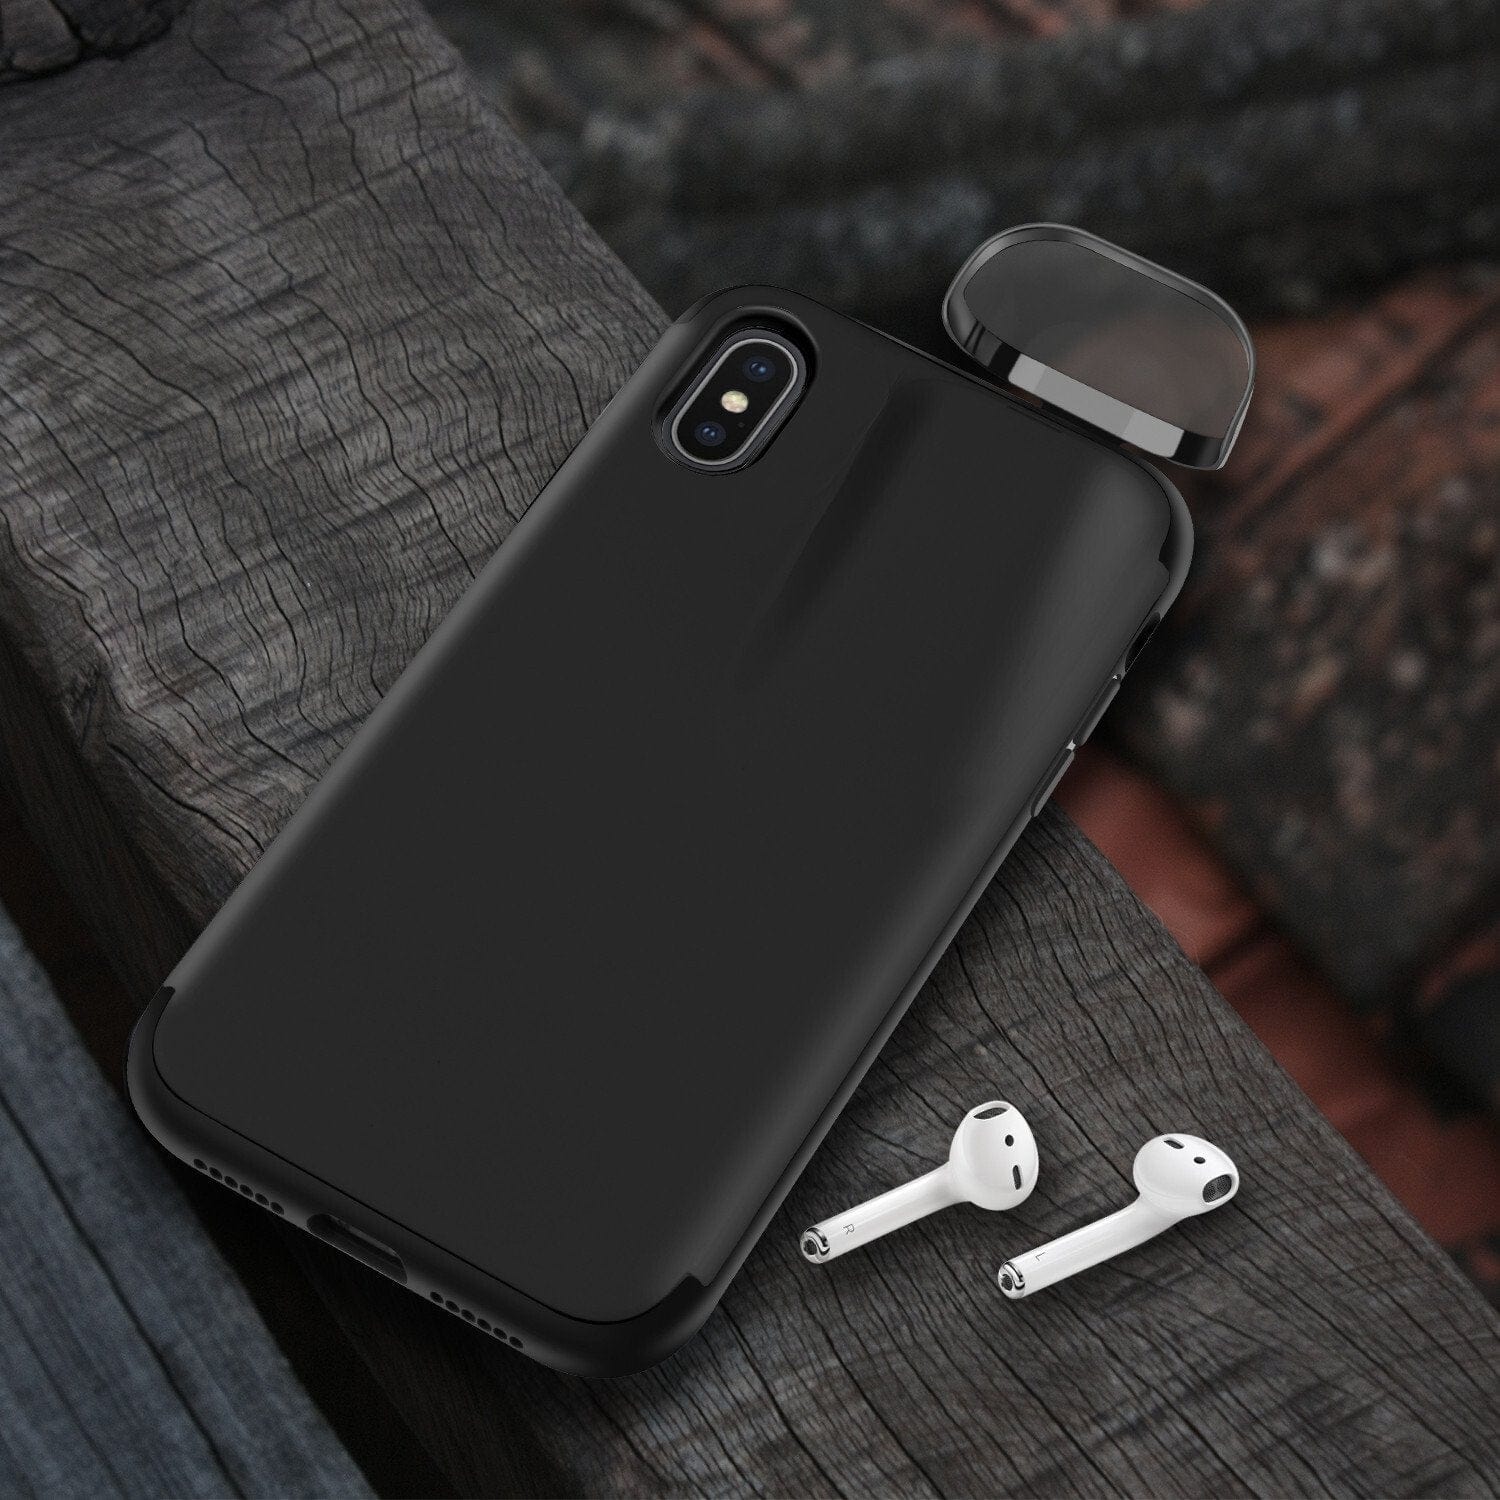 iPhone Aipod Case Best Airpods Holder iPhone Cover - Podshield™ Black Podshield™ Zaavio®